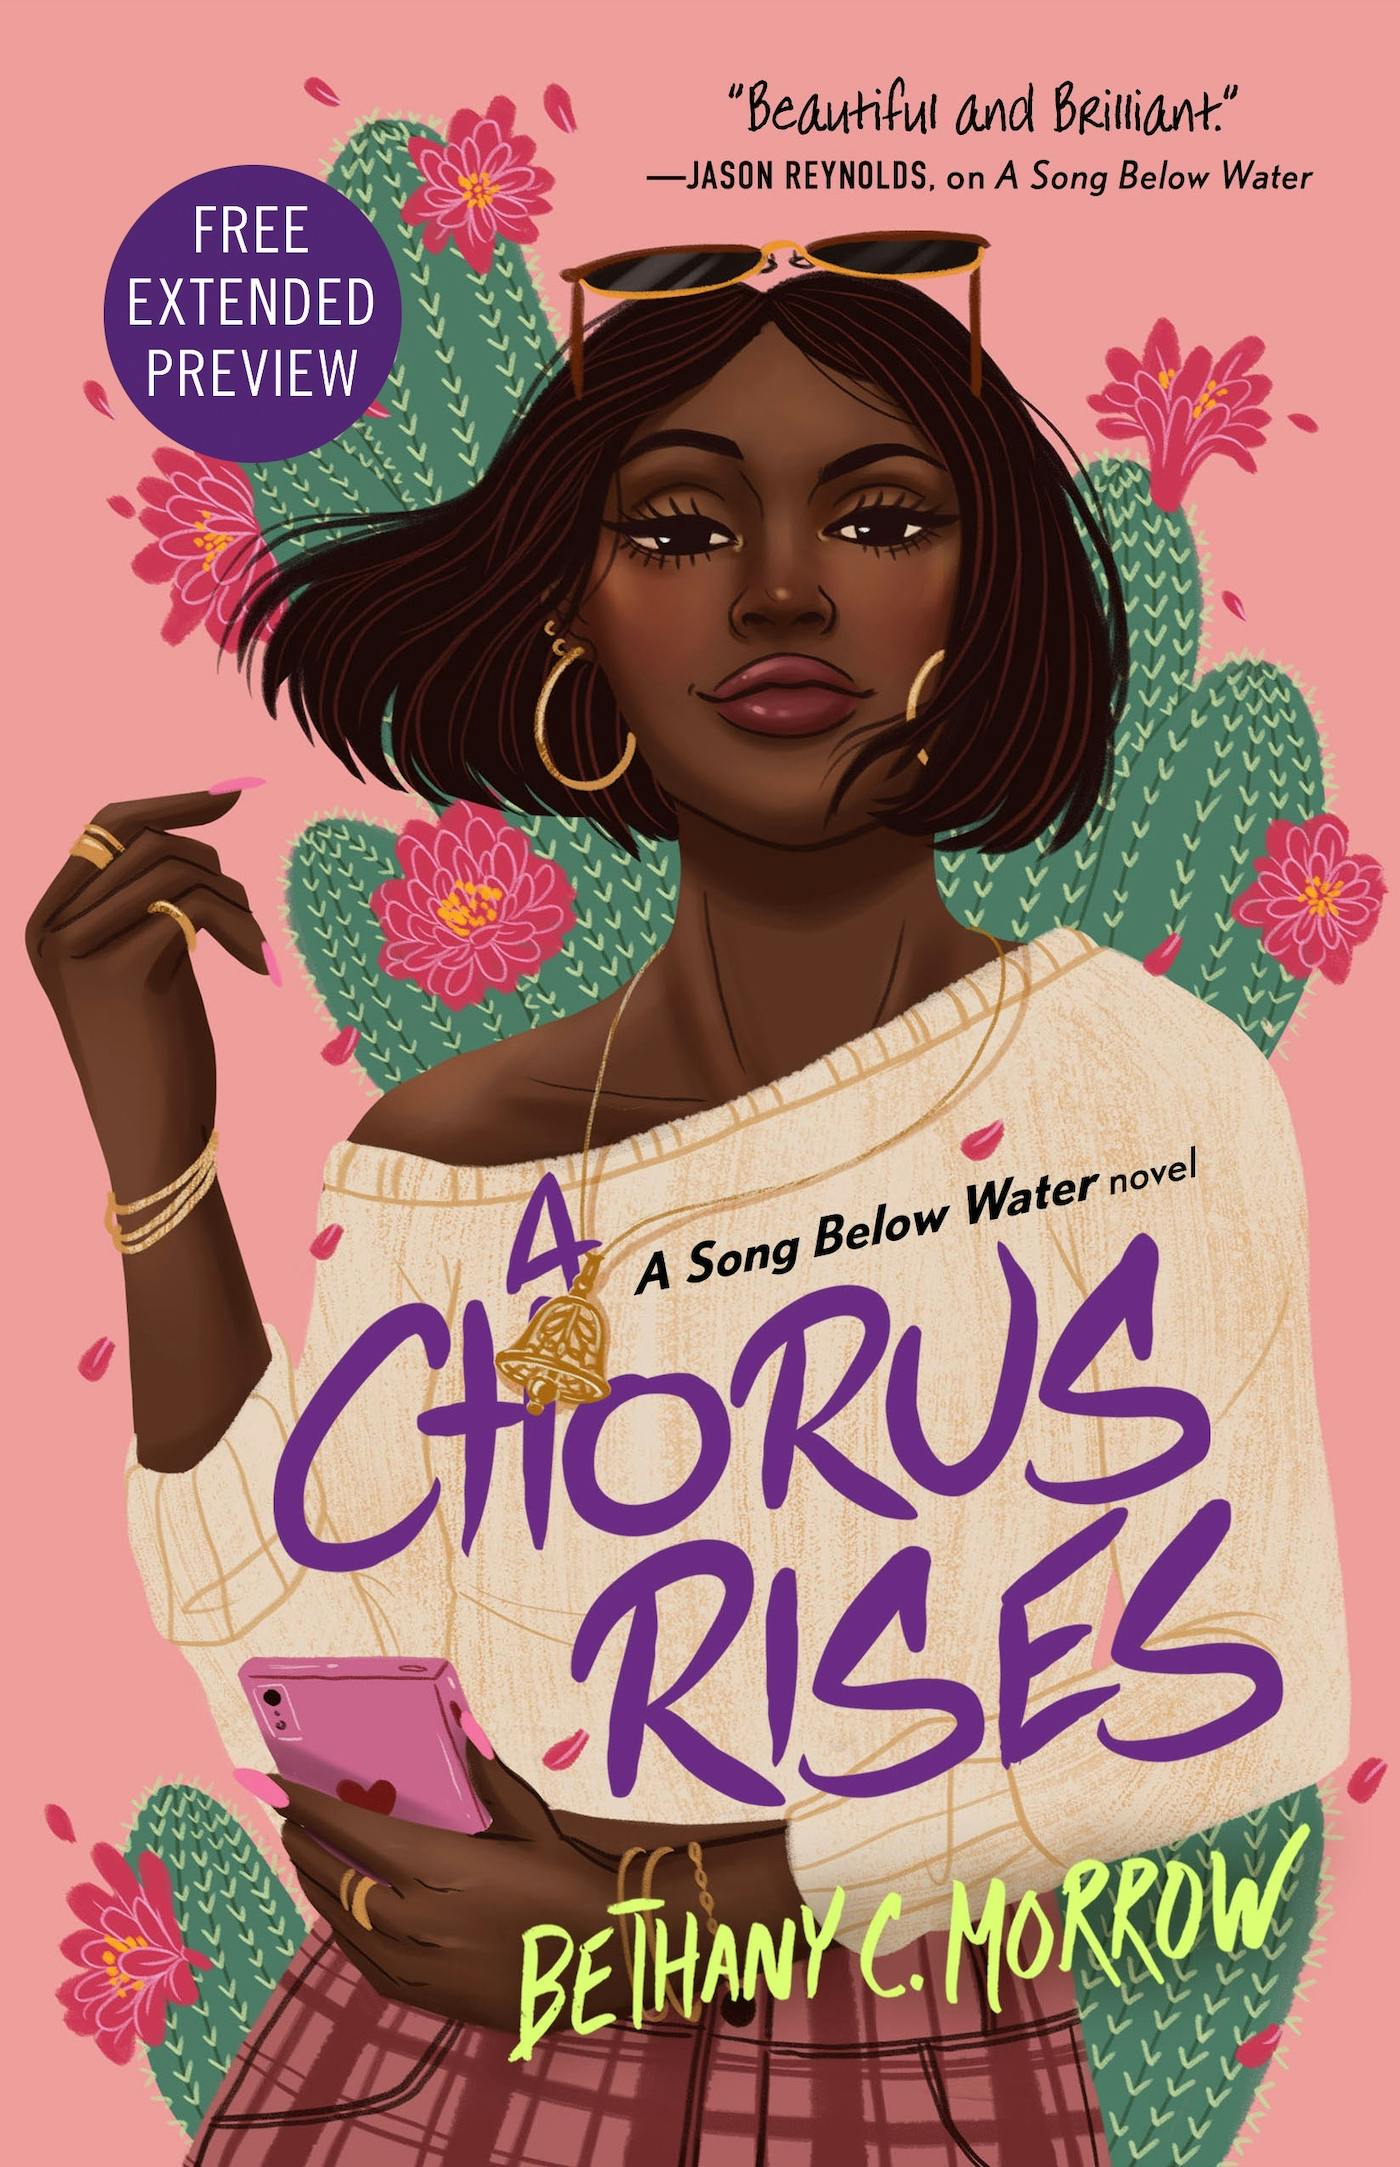 Cover for the book titled as: A Chorus Rises Sneak Peek